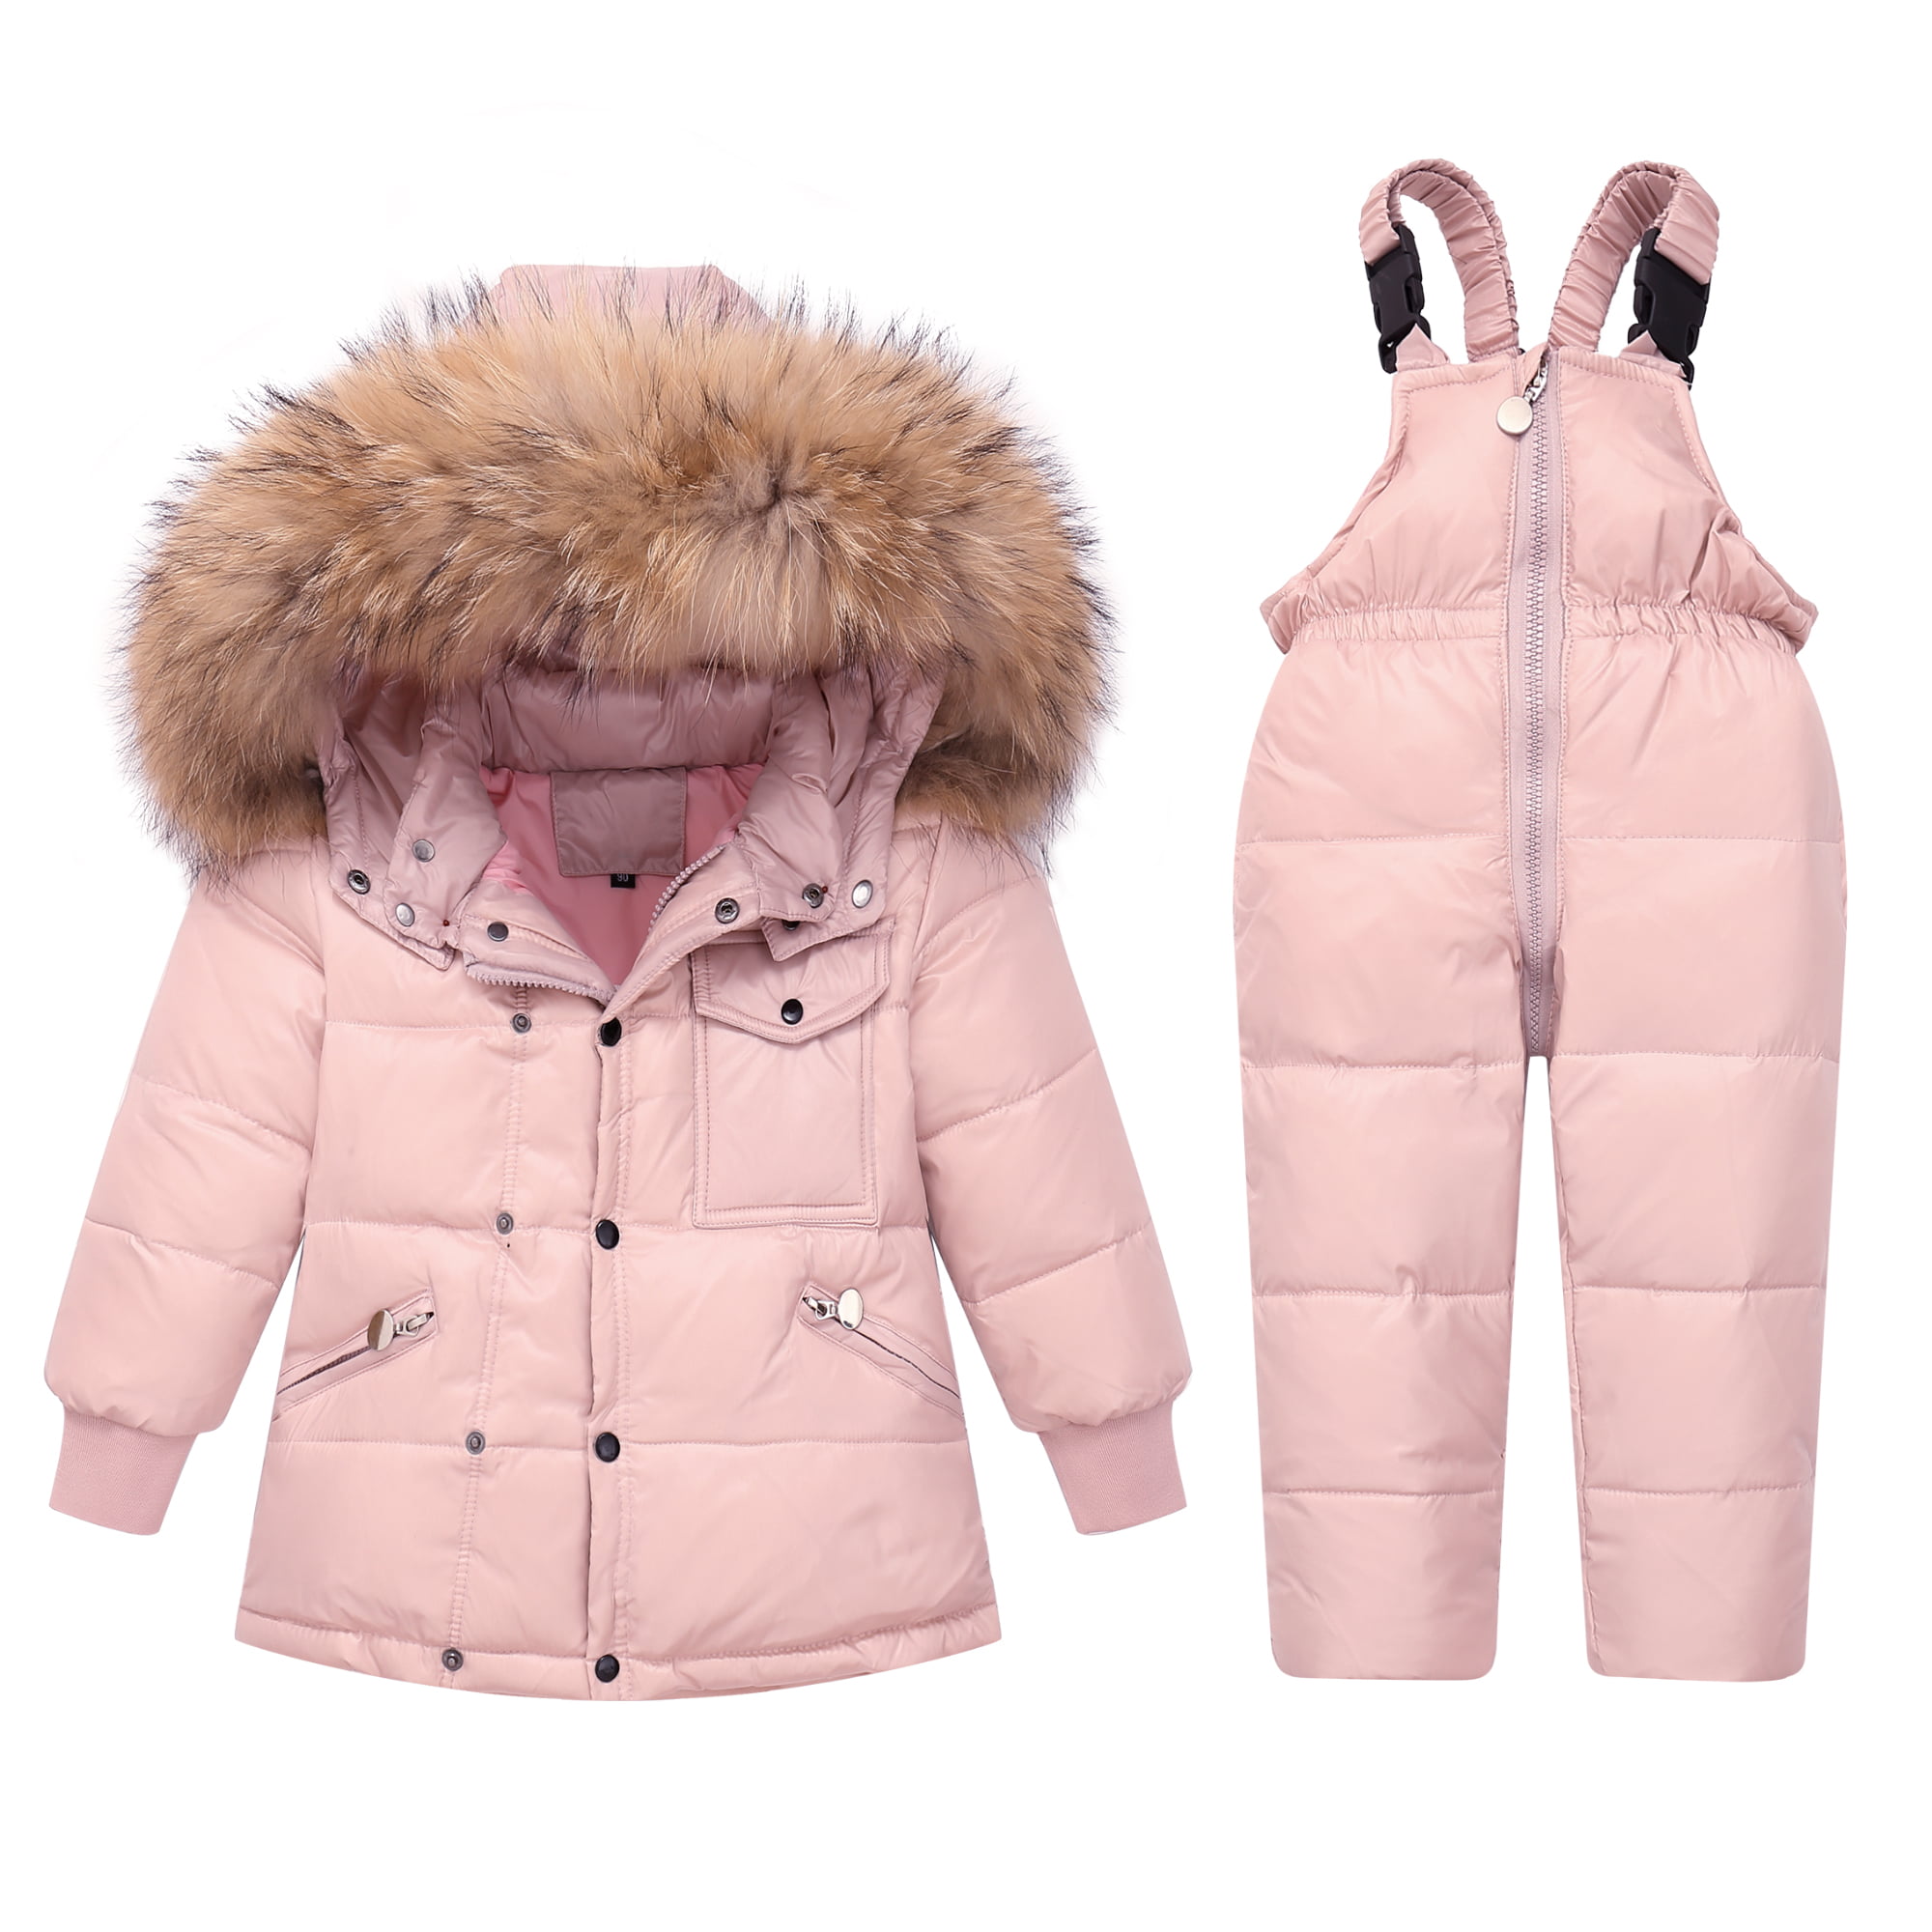 CARETOO Unisex Baby Winter Snowsuits Jacket Coats Hooded for Winter Warming 